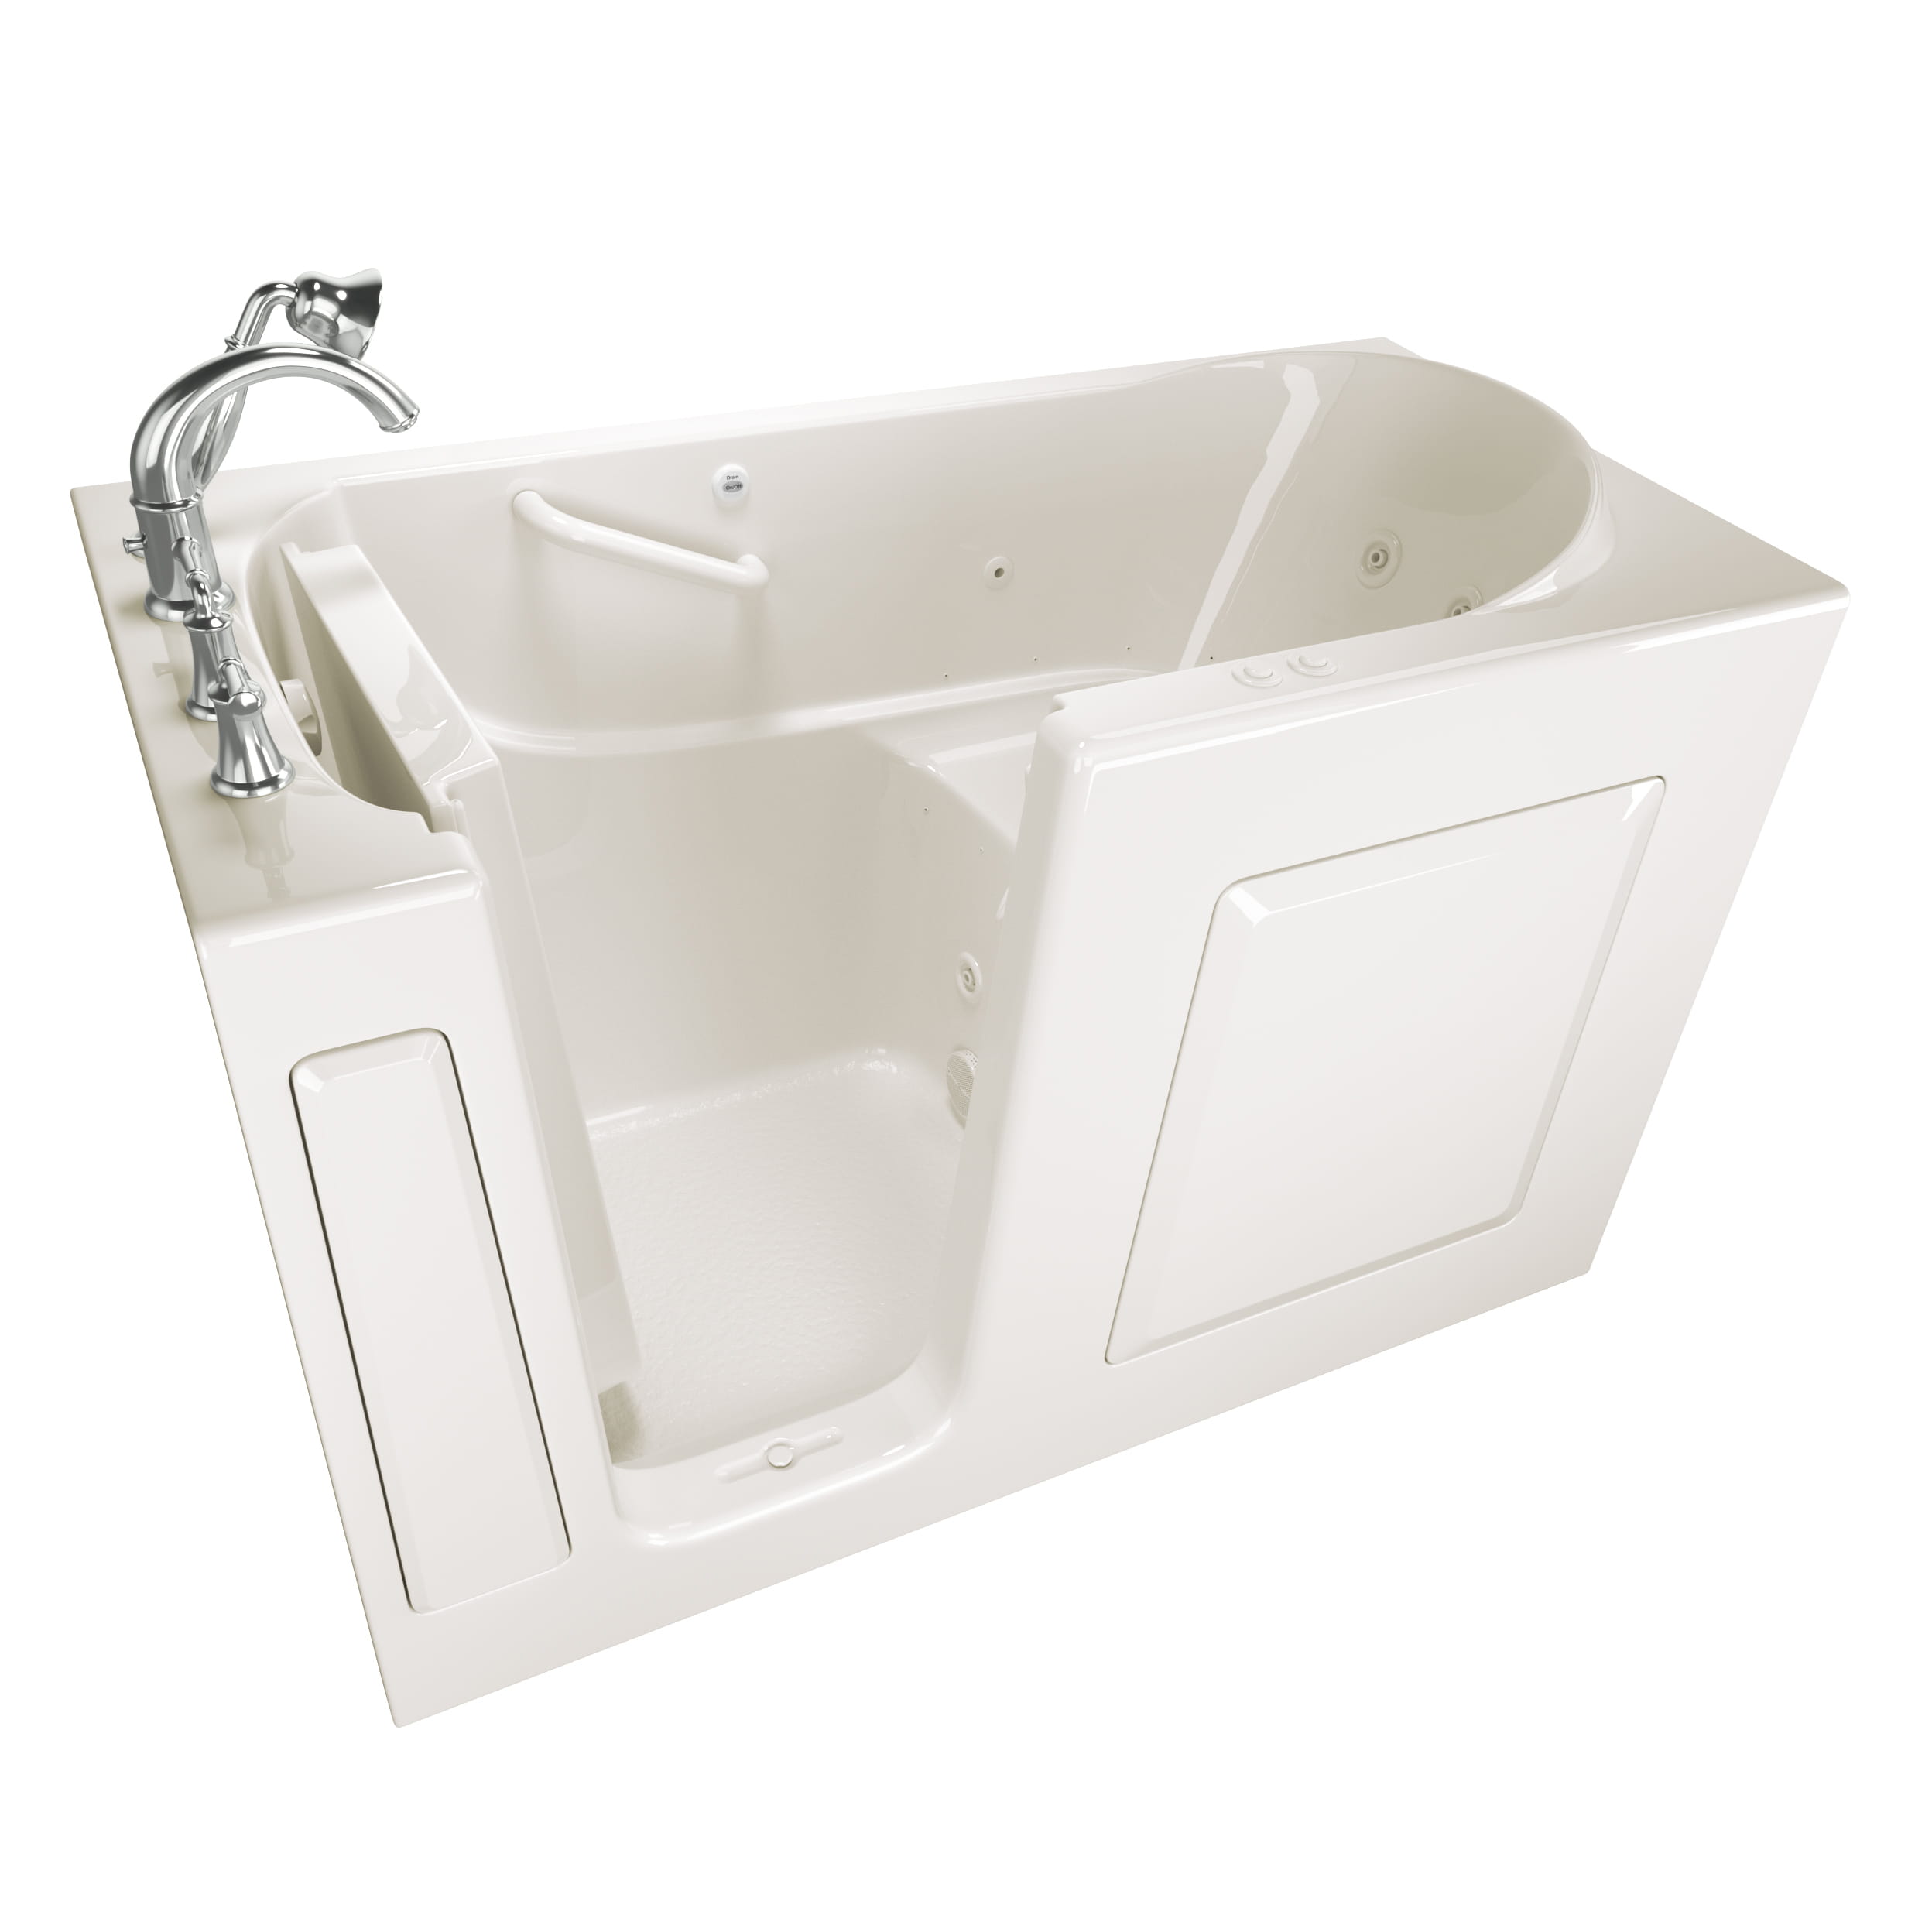 Gelcoat Value Series 30x60 Inch Walk-In Bathtub with Combination Air Spa and Whirlpool Massage System - Left Hand Door and Drain